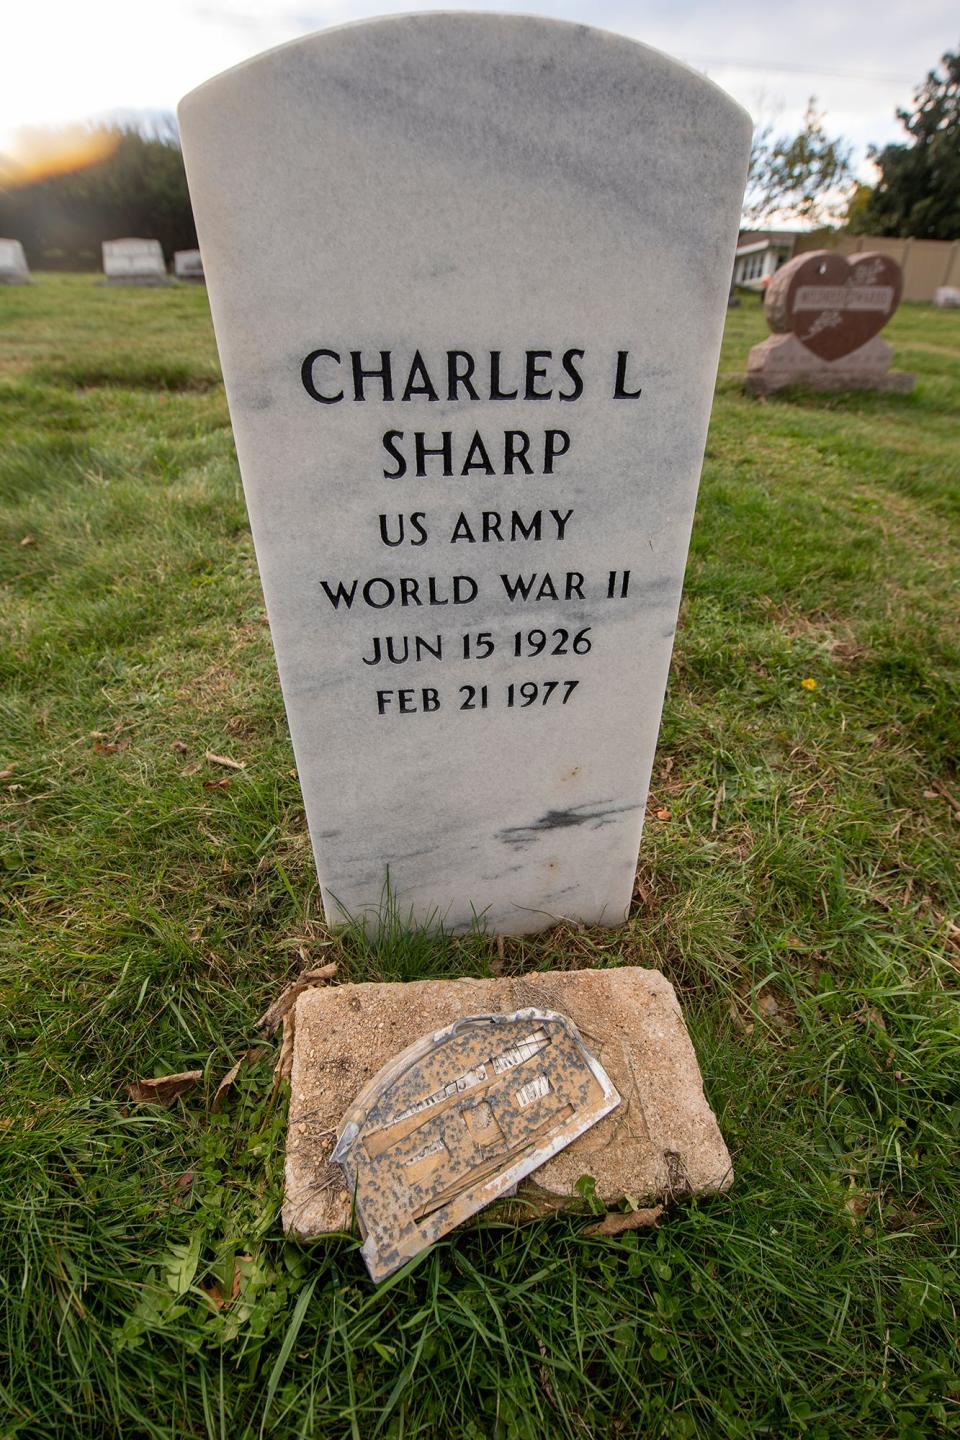 A new stone for World War II veteran Charles L. Sharp rises above the buried marker that marked his final resting place for decades.